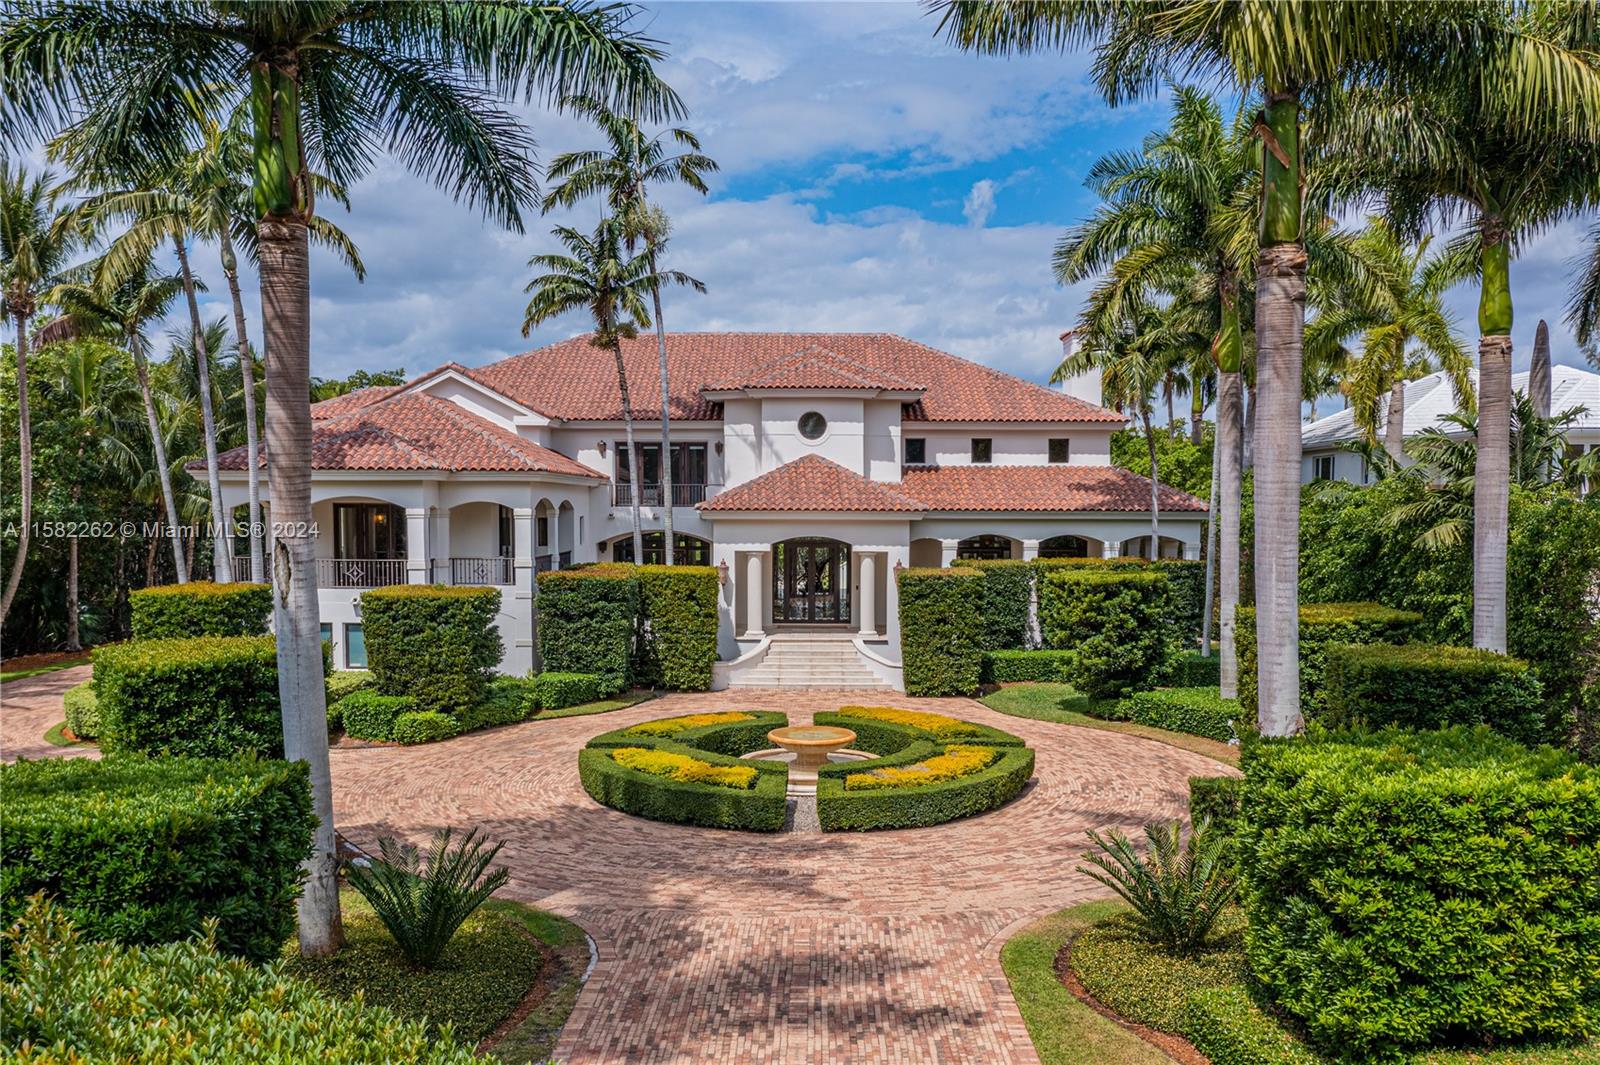 A one-of-a-kind, Mediterranean estate in the prestigious and private gated community of Tahiti Beach Island. Located at the end of a cul-de-sac, sitting on over an acre and featuring 25-foot-high ceilings in the foyer & living room. Perfect for entertaining, the large kitchen with wet bar and butler’s pantry leads to a light filled family room that opens to an extensive outdoor terrace, 24 x 40 pool and guest house. Boasting an opulent primary bedroom with dual closets, an oversized bathroom and a private balcony looking over the pool and yard.  Tahiti Beach Island offers a private beach, tennis courts, pickleball & access to all of Cocoplum’s amenities.